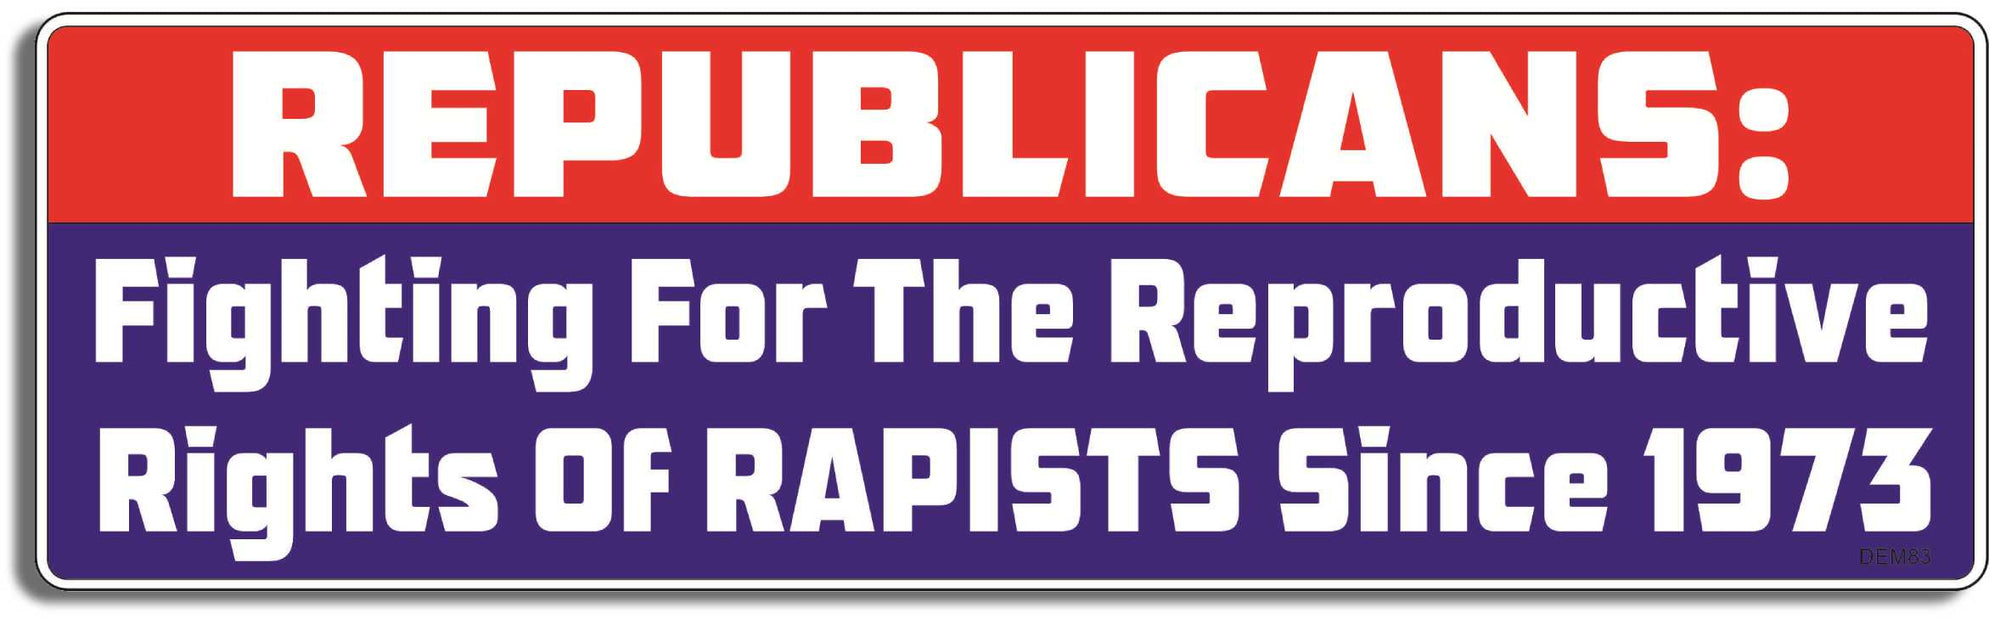 REPUBLICANS: Fighting For The Reproductive Rights Of RAPISTS Since 1973 - 3" x 10" -  Decal Bumper Sticker-liberal Bumper Sticker Car Magnet REPUBLICANS: Fighting For The Reproductive-  Decal for carsdemocrat, liberal, political, Politics